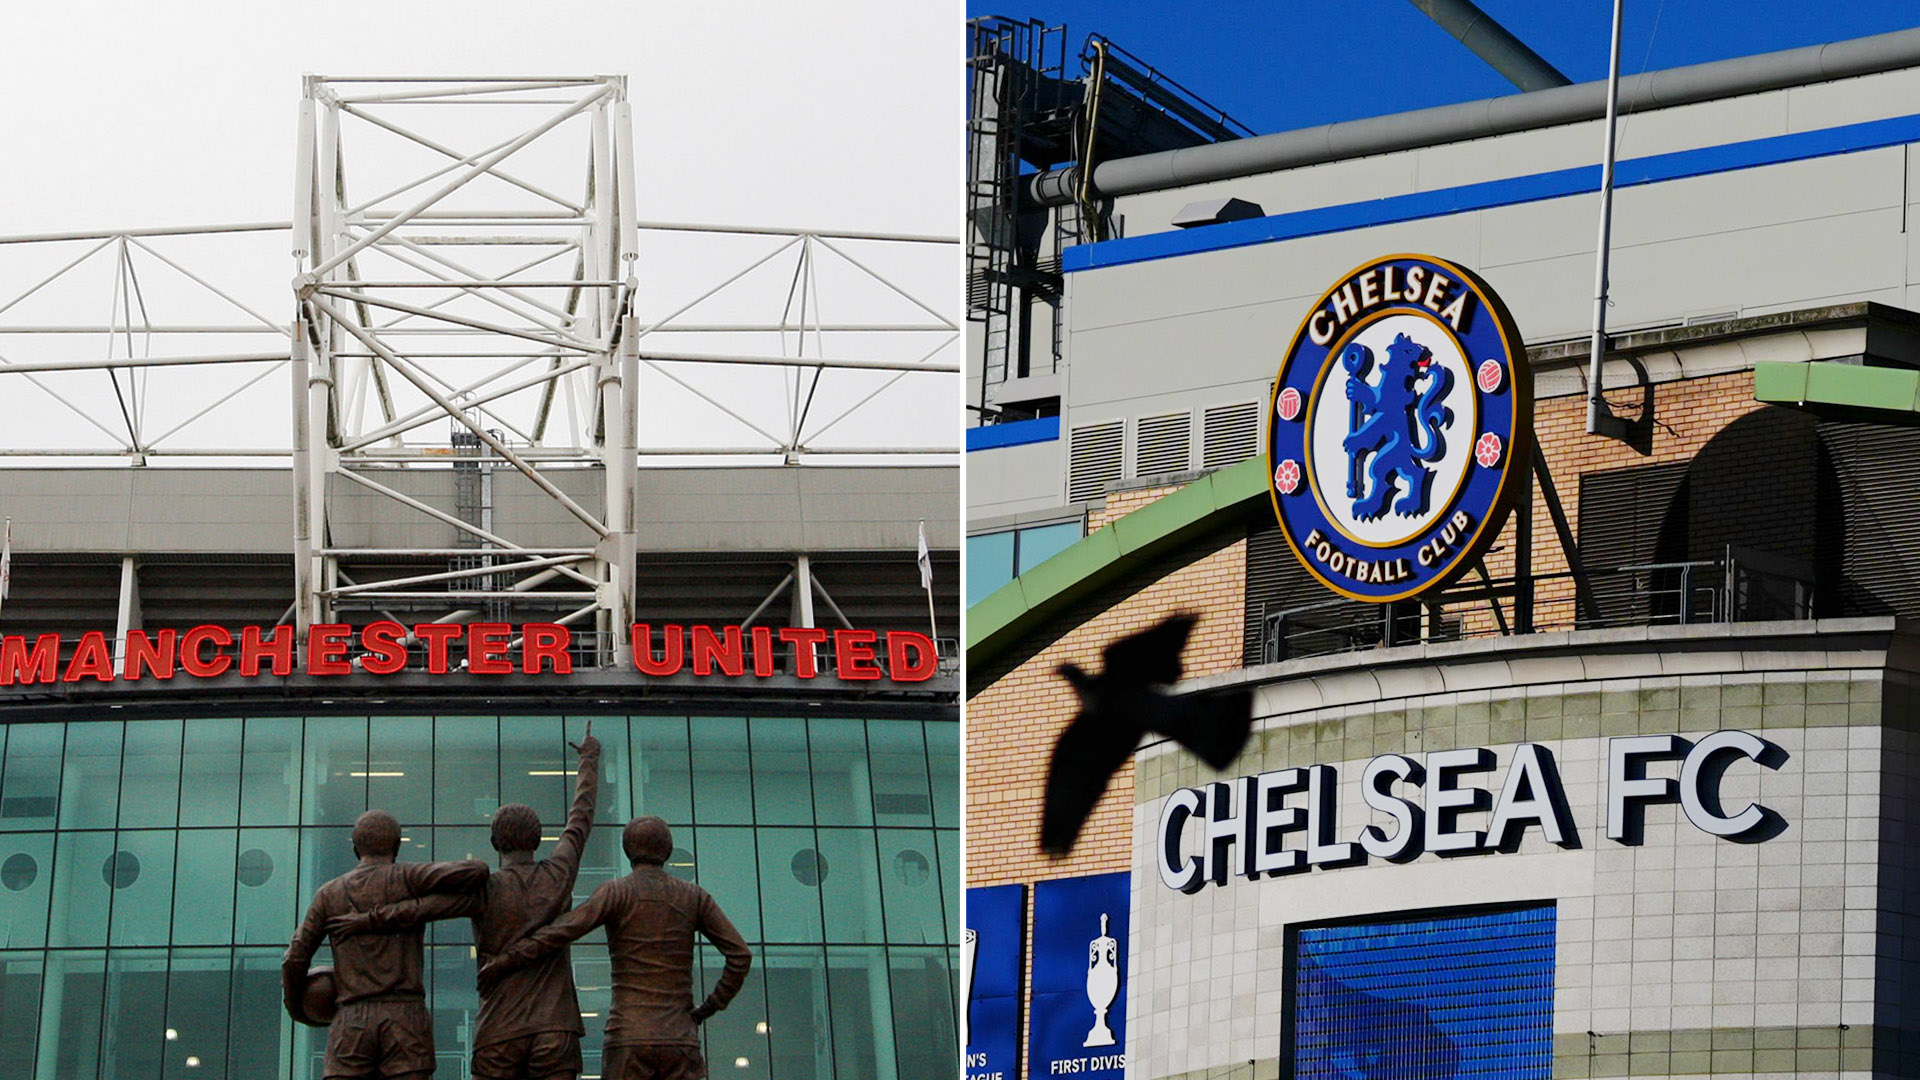 Man Utd and Chelsea ‘among most dangerous grounds after drill accident and attempt to put out spark with beer’ [Video]